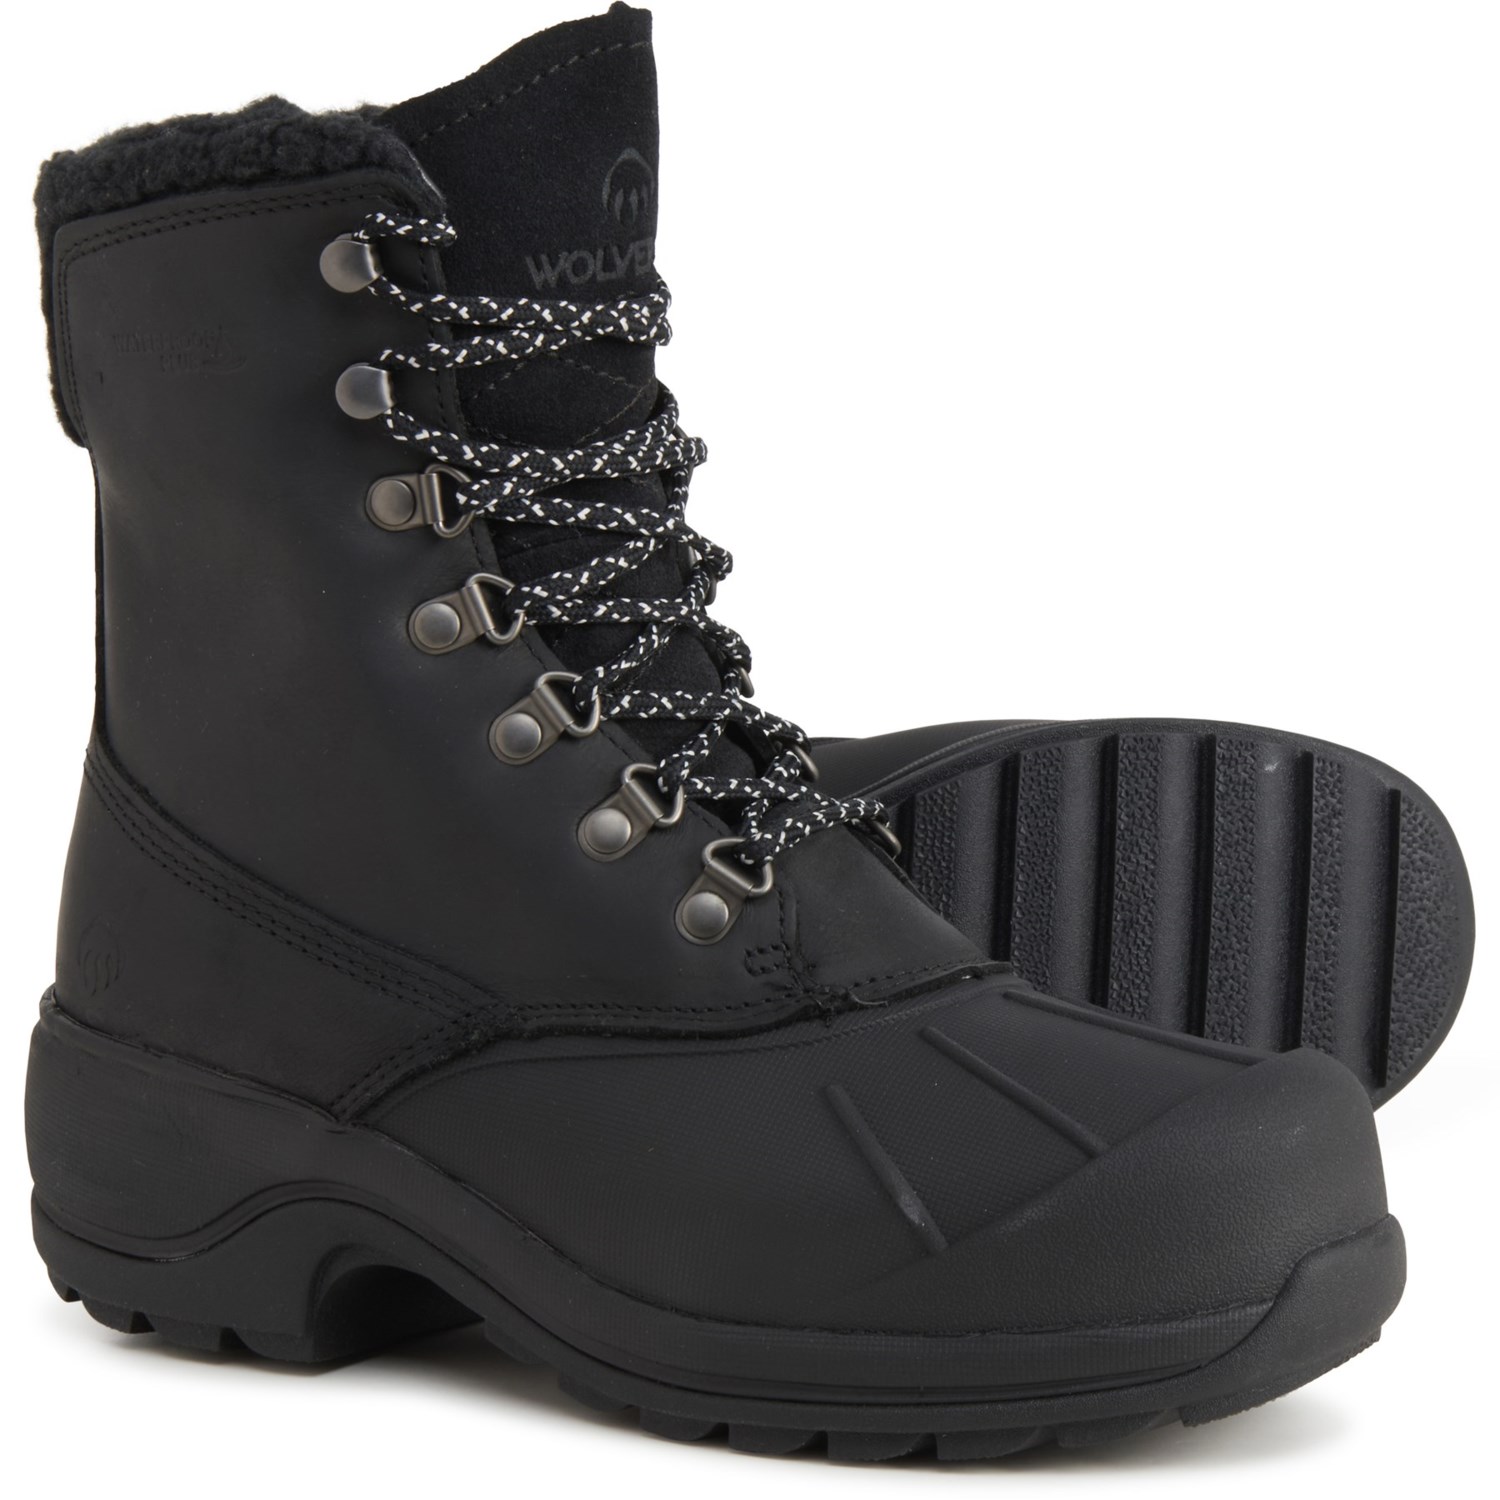 Wolverine Frost Tall Winter Boots (For Women) - Save 50%